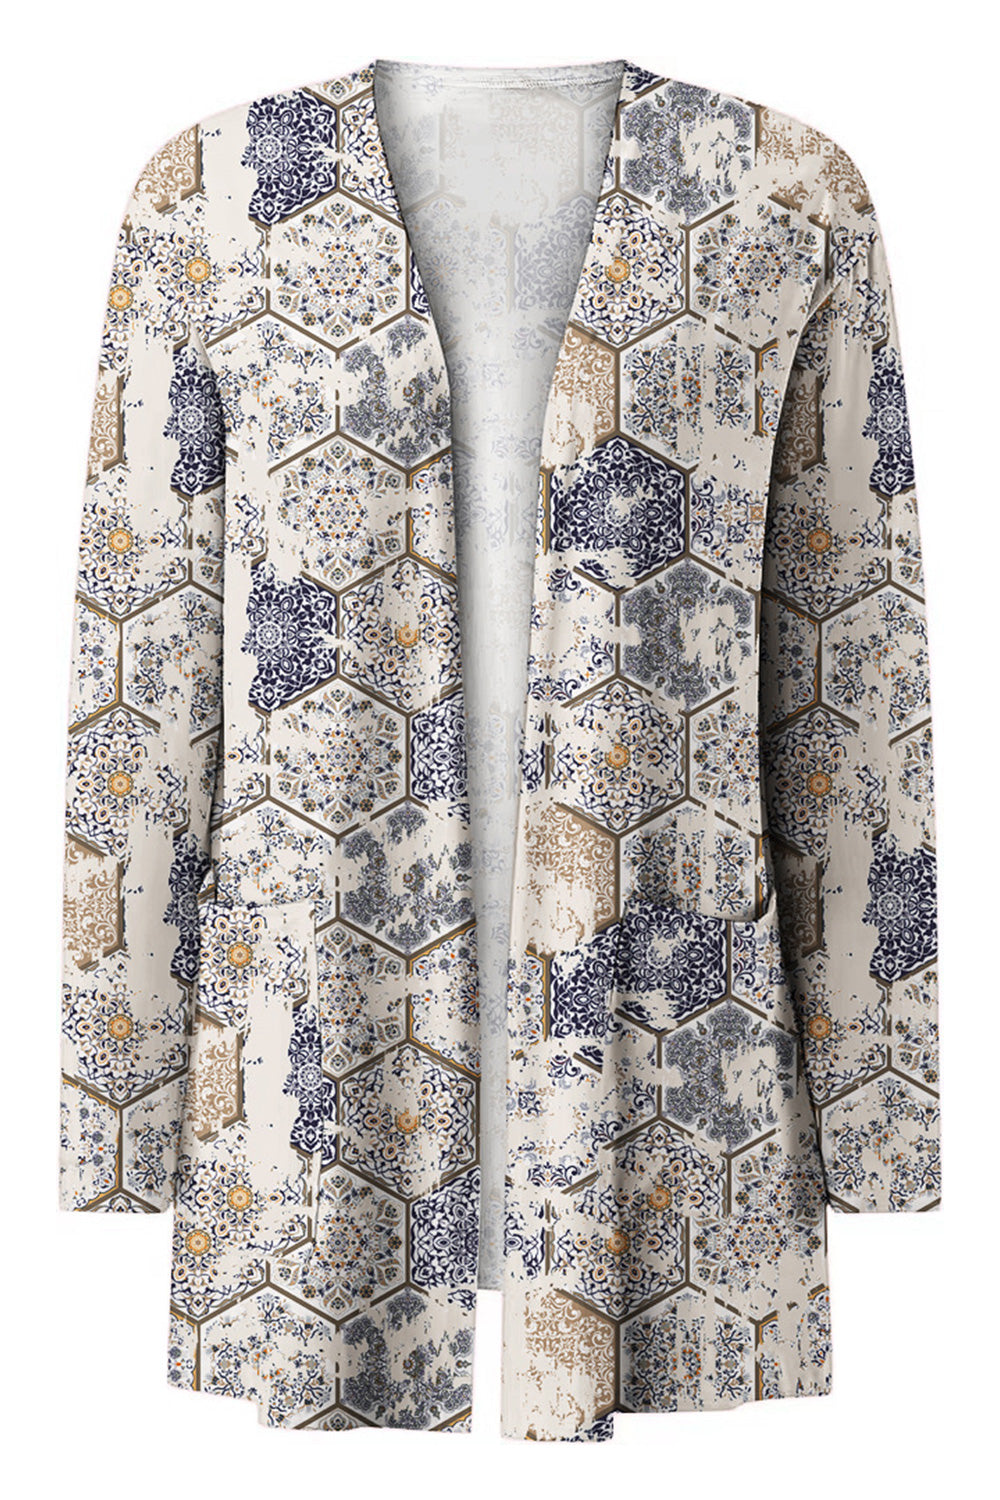 Printed Long Sleeve Cardigan - Women’s Clothing & Accessories - Shirts & Tops - 15 - 2024